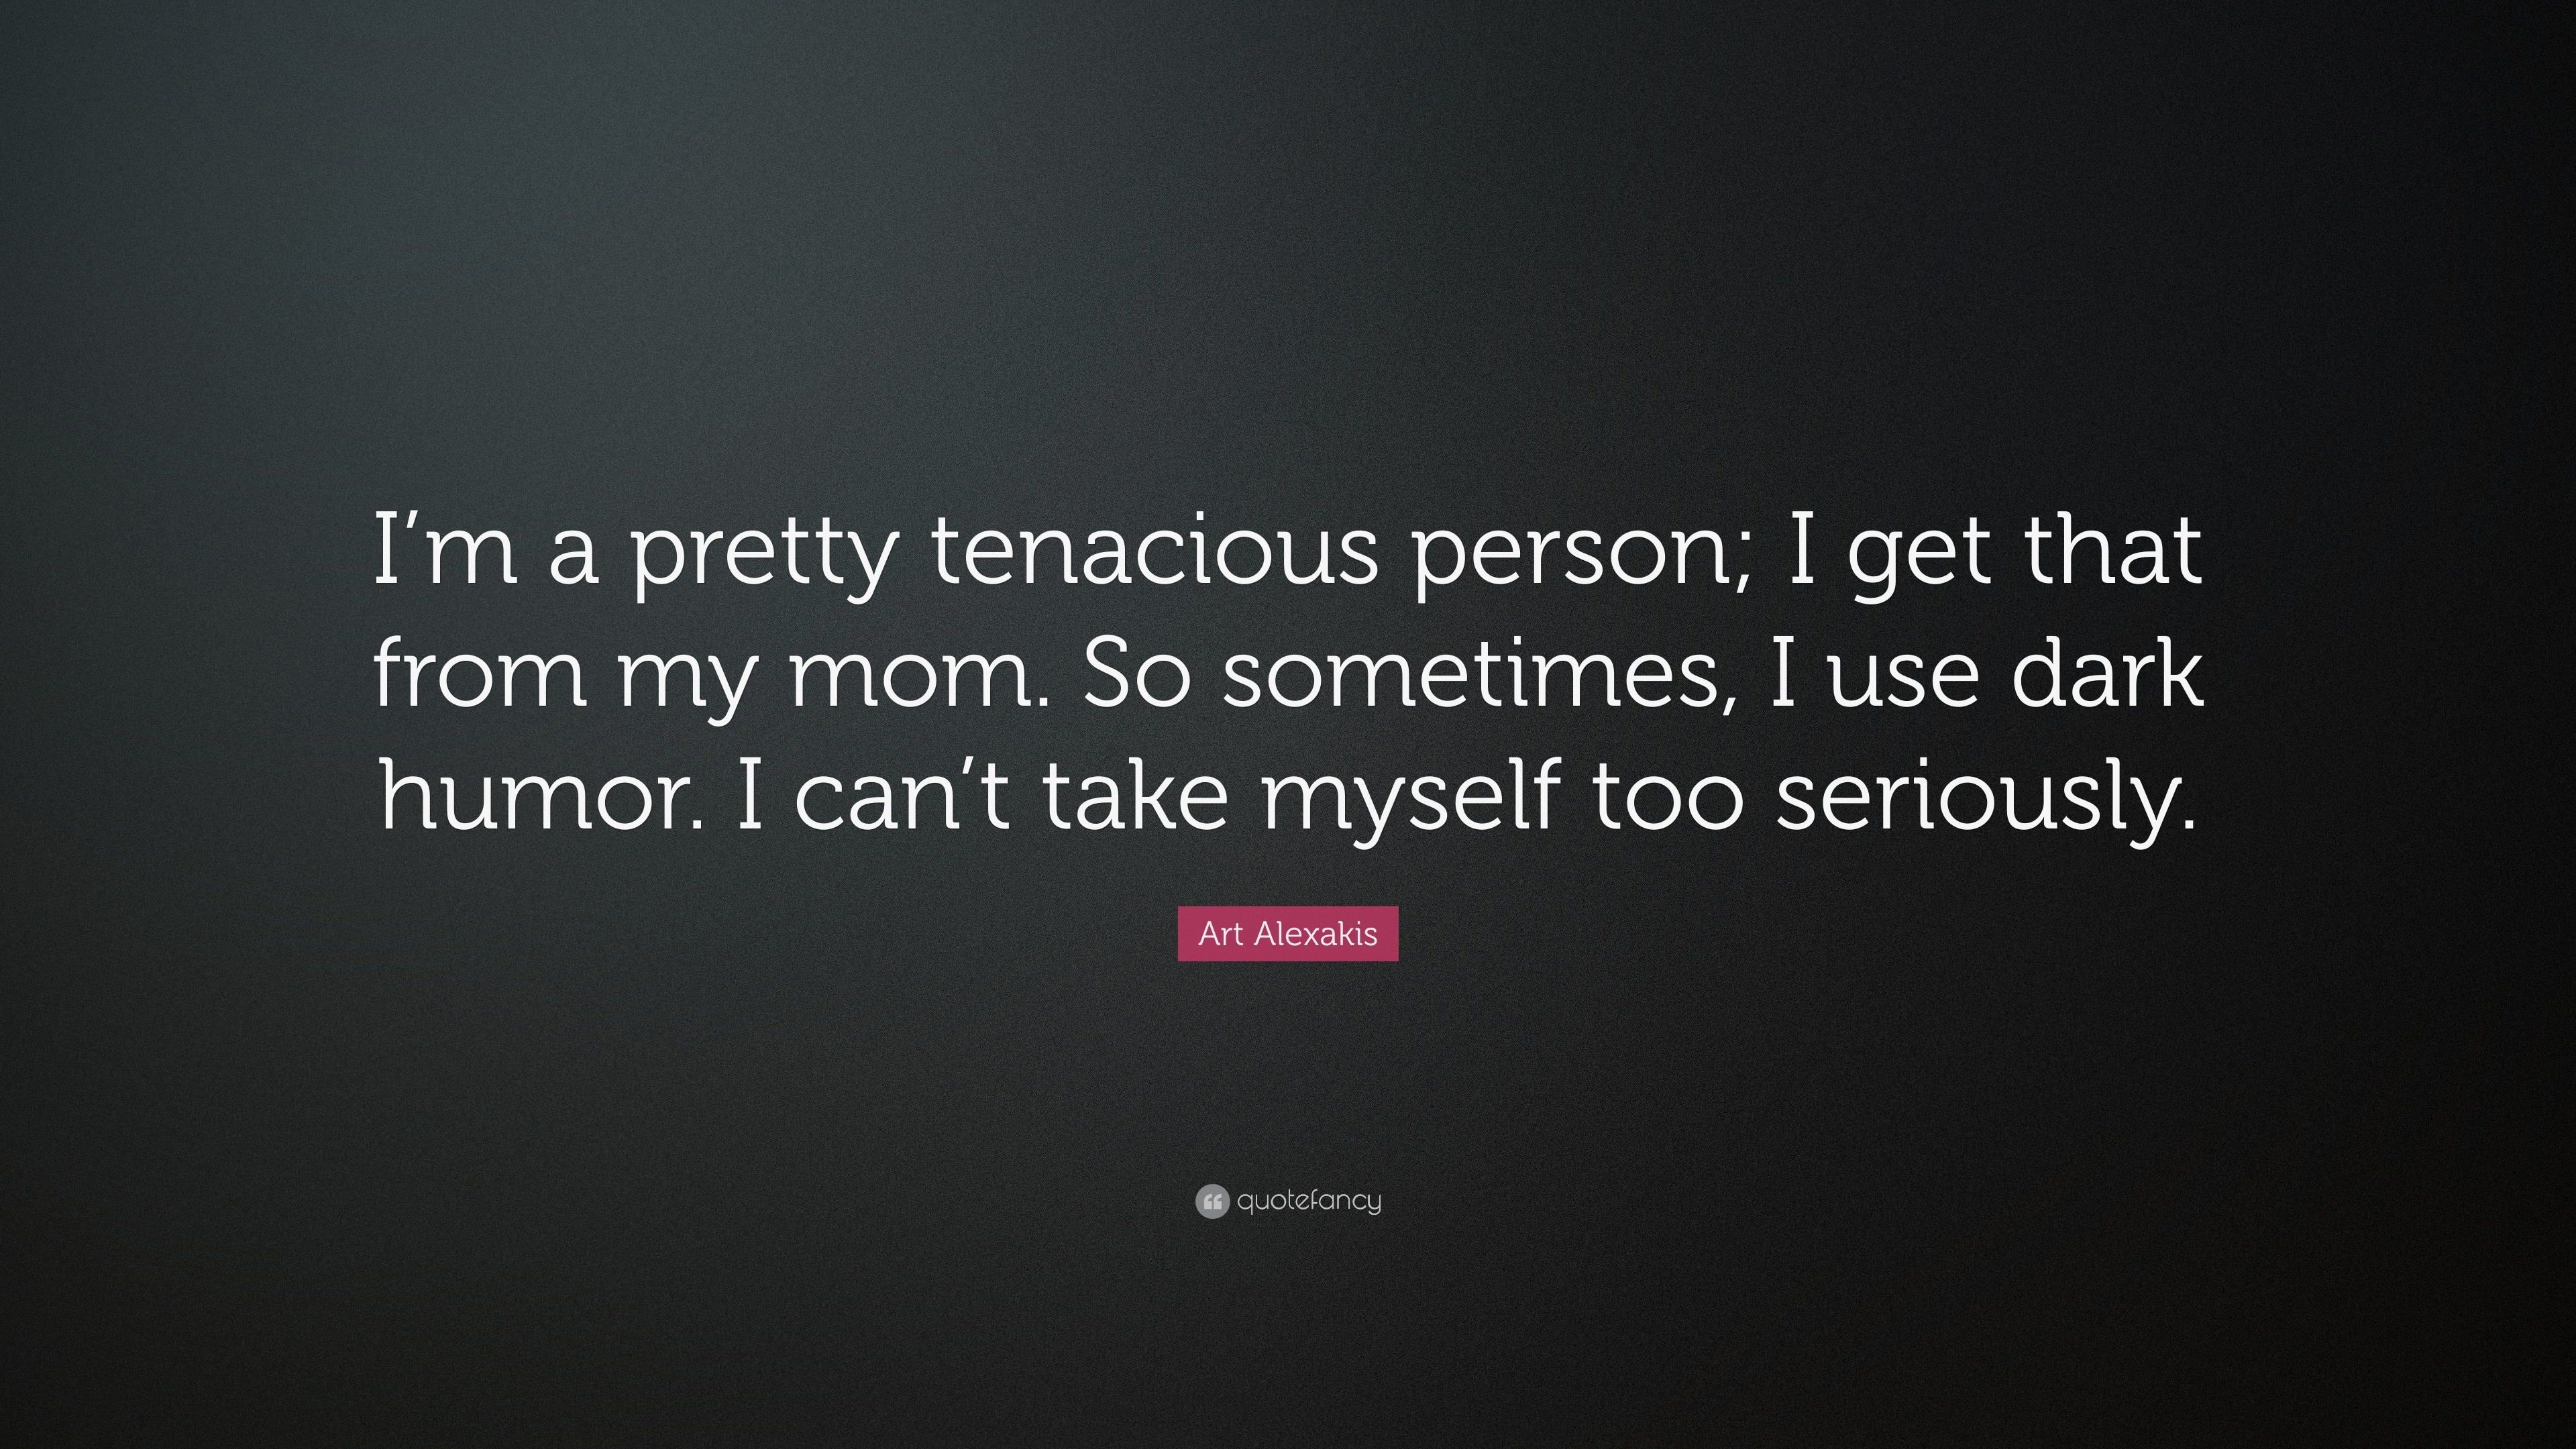 italki - Do you think that you are a TENACIOUS person? This means